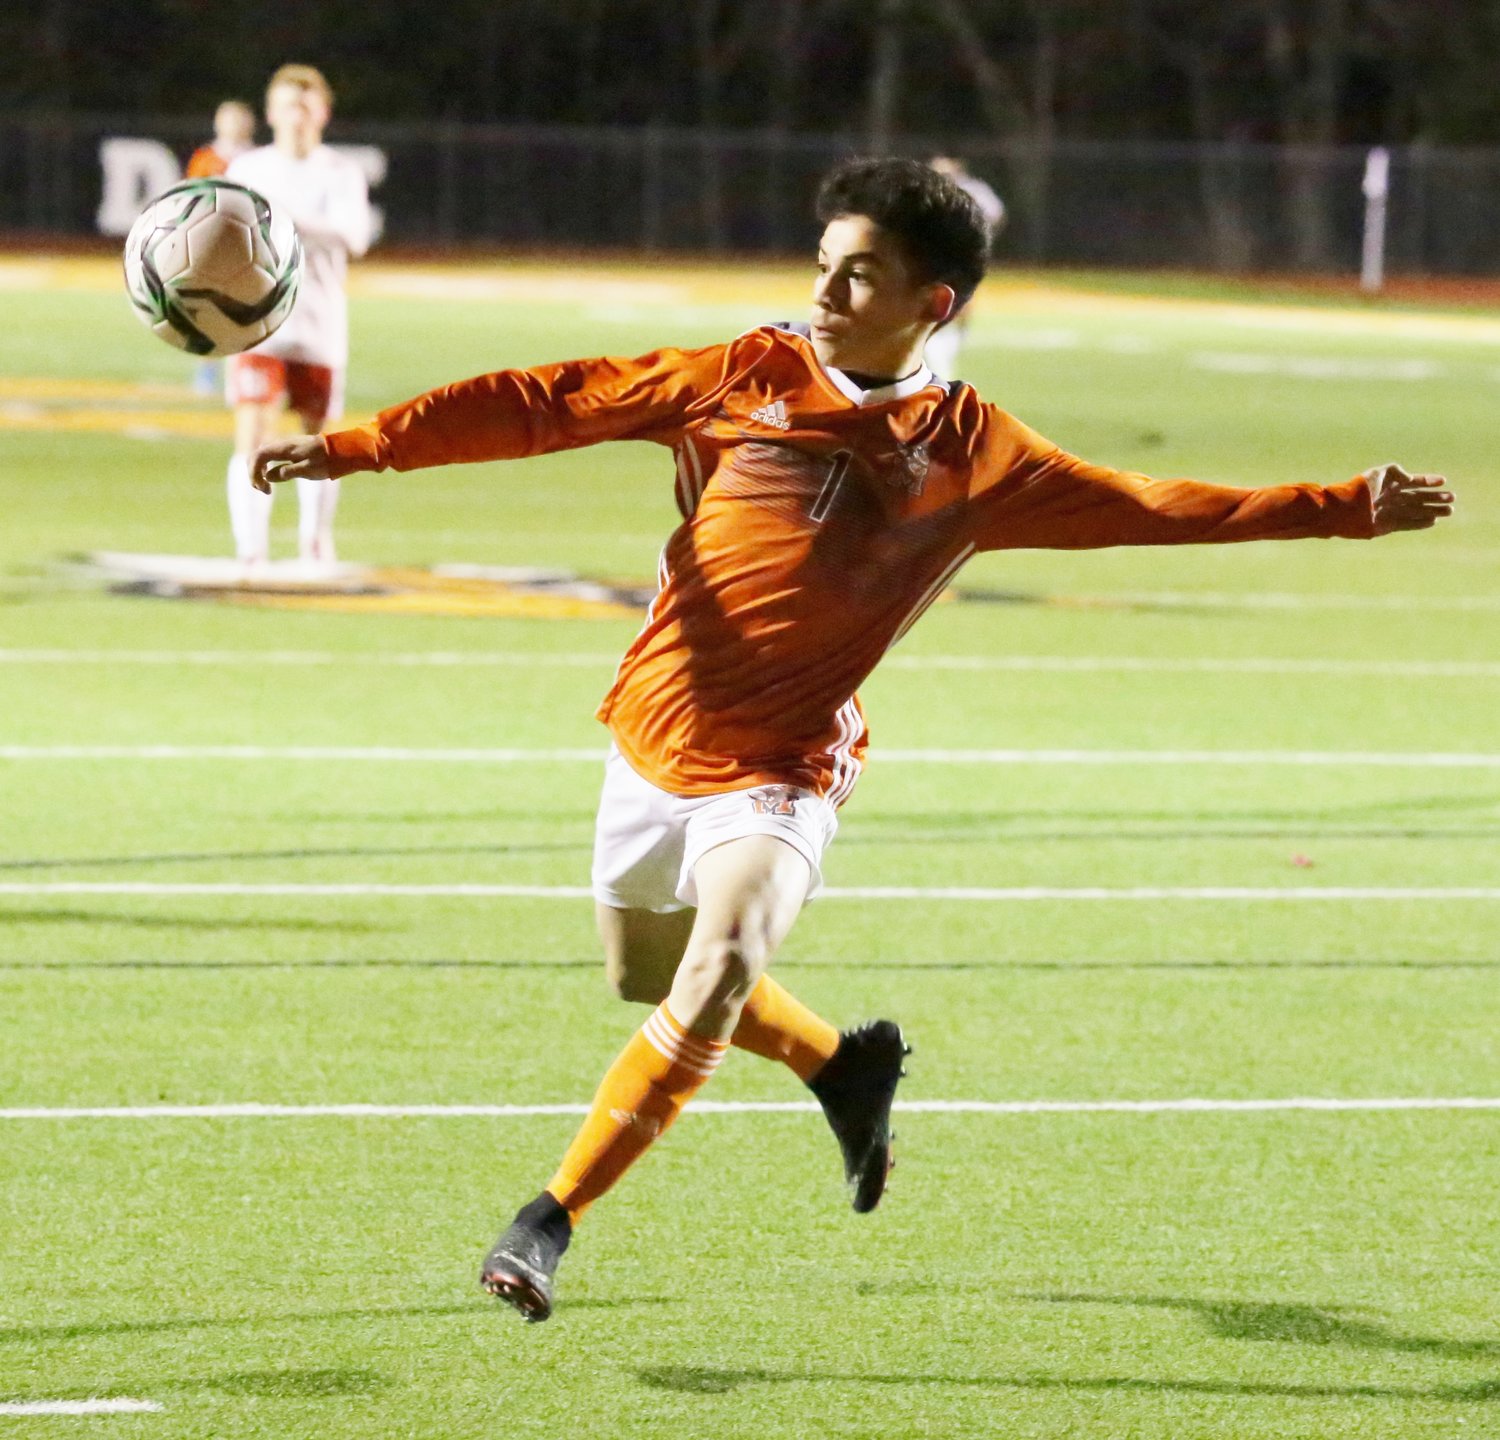 Yellowjacket Omar Galaz offered a beautifully-handled shot attempt in the 18th minute of action against Van last Friday.